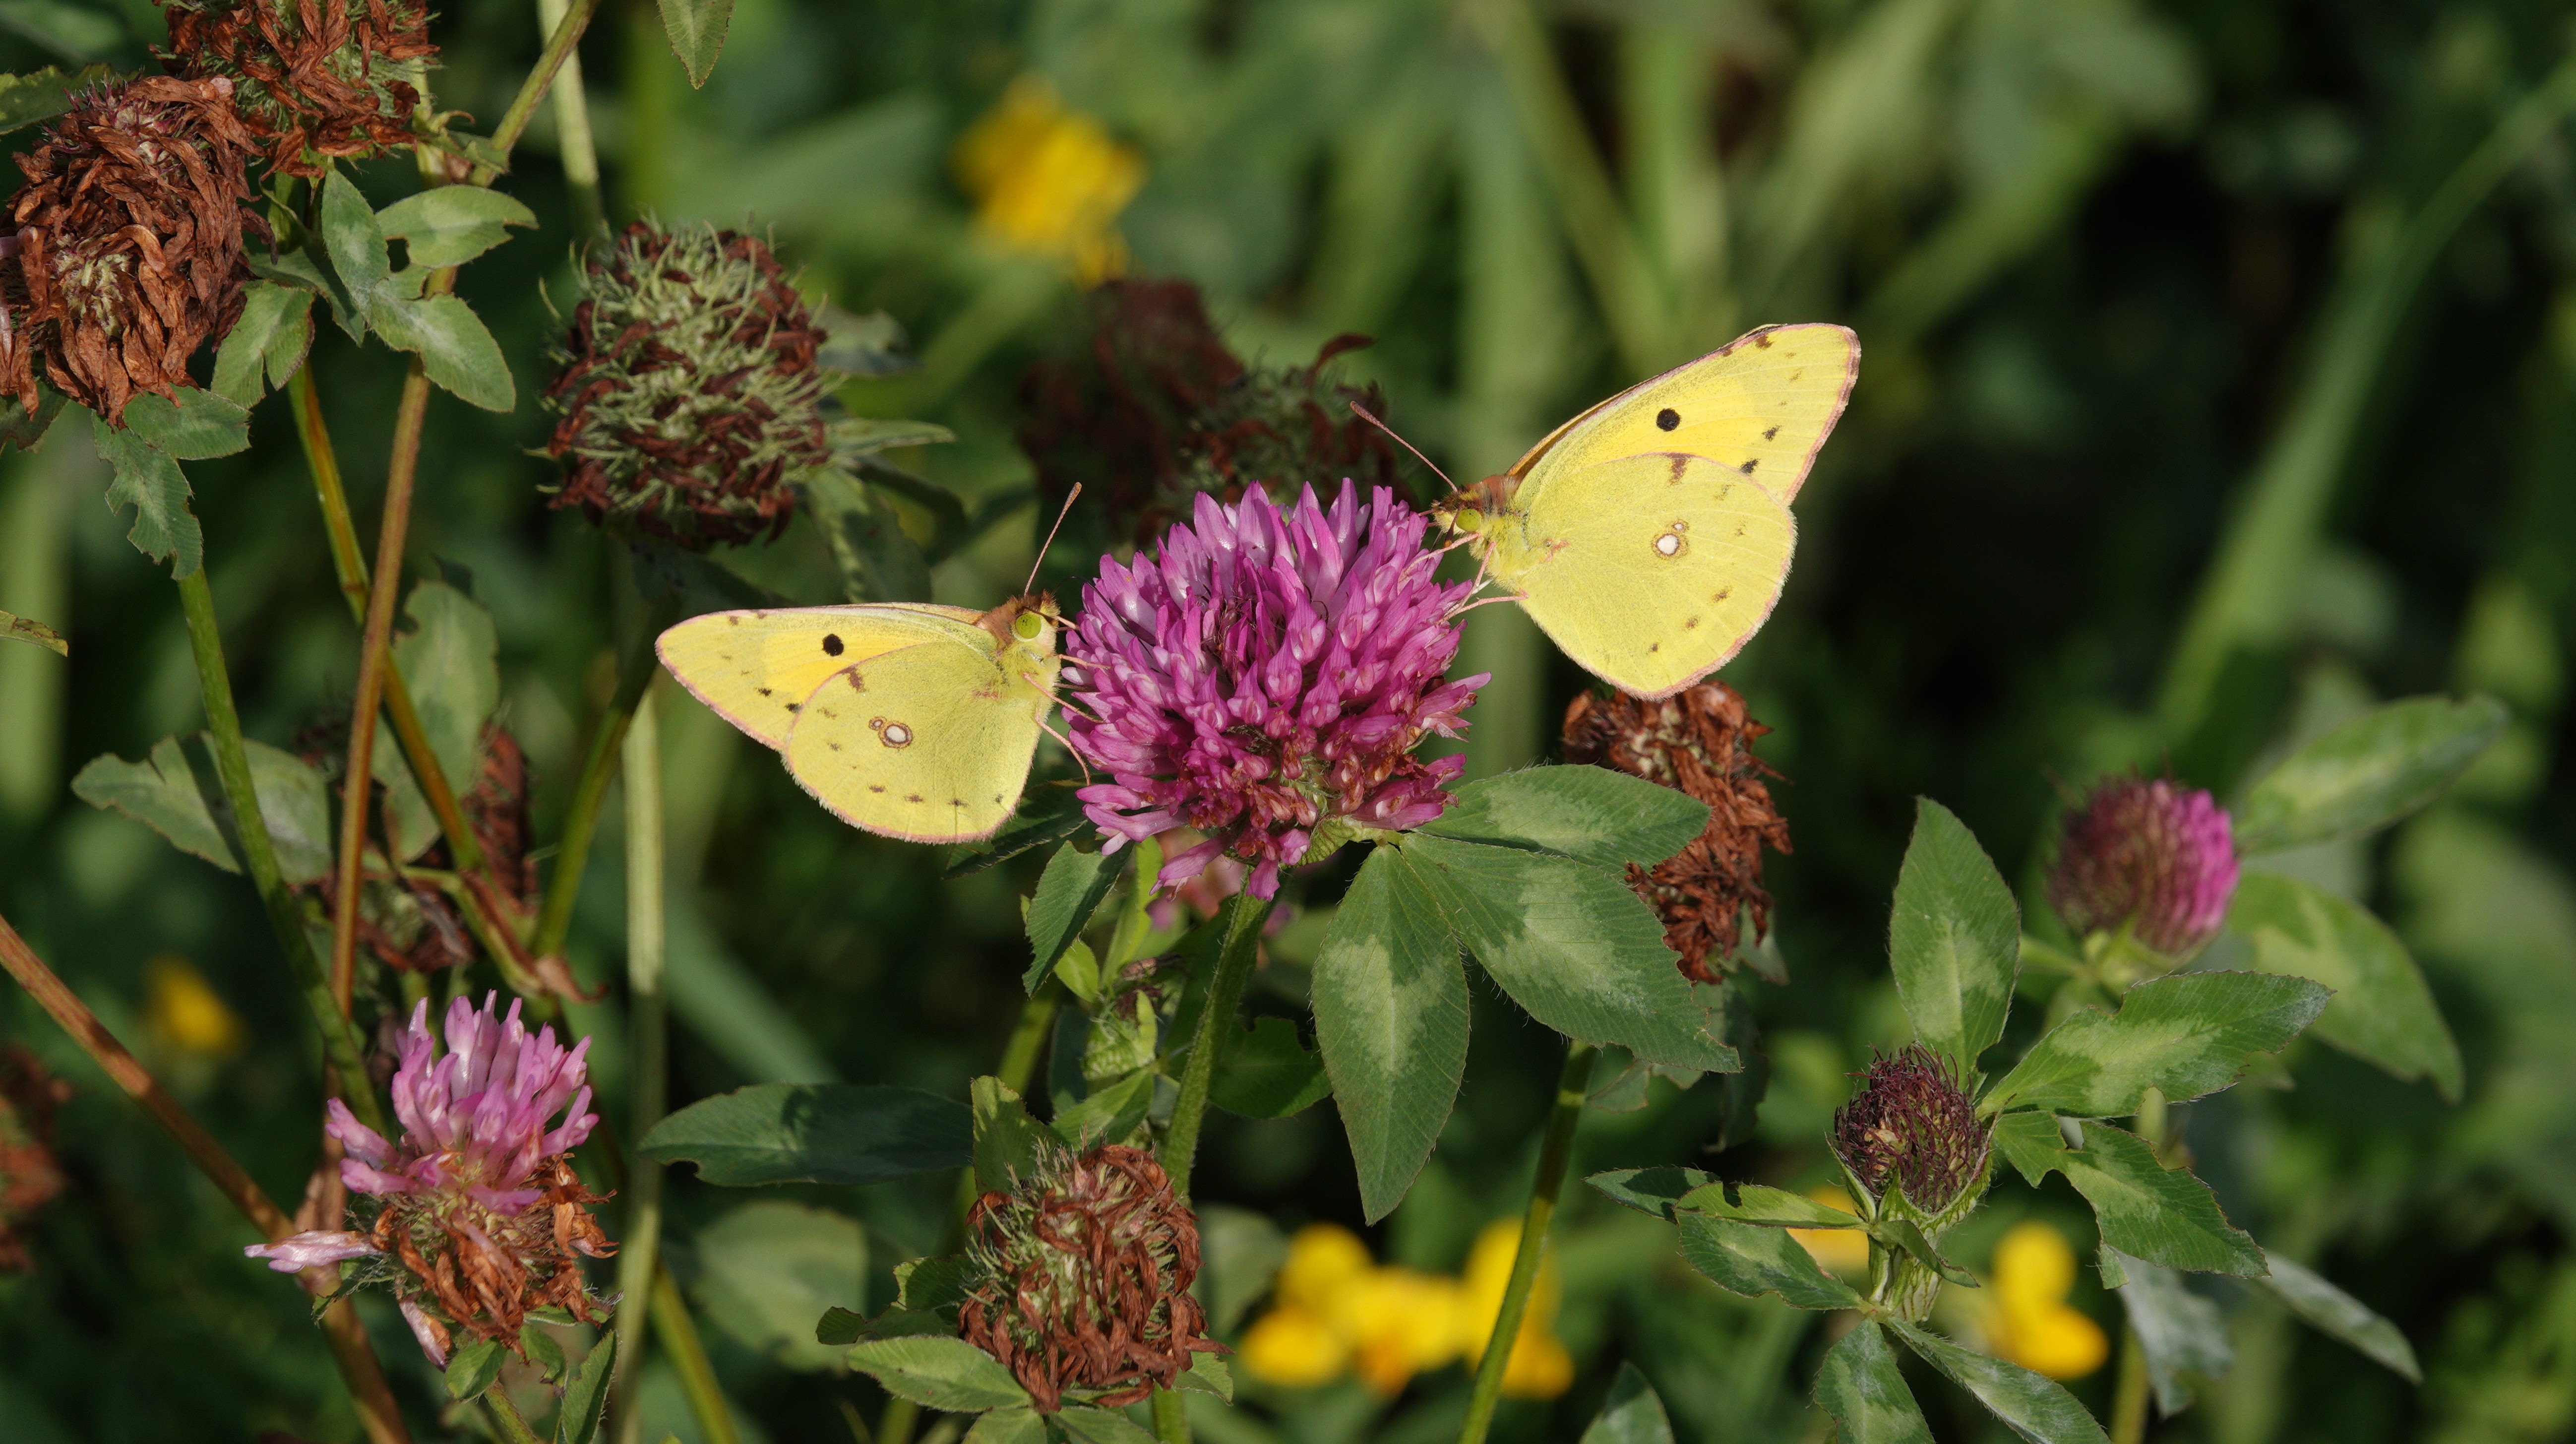 A couple of Clouded Yellows having a meet up over a clover lunch